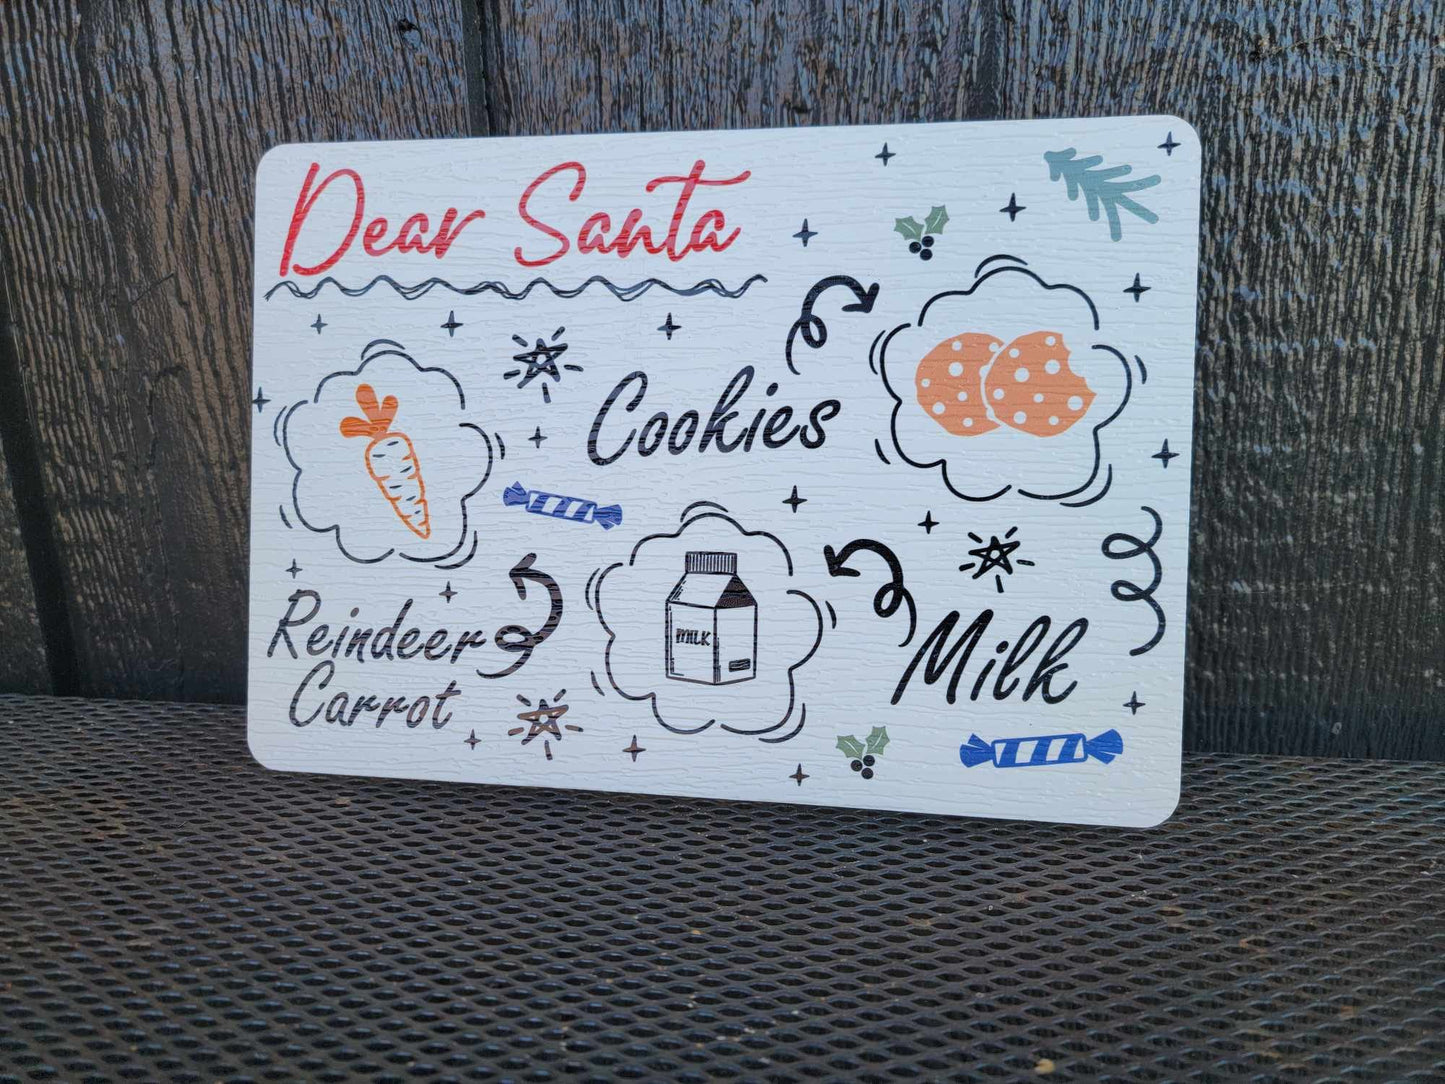 Dear Santa Cursive Drawing Tray Cookies Milk Reindeer Carrot PVC Printed Christmas Day Treat Gift Snack Plate Leave for Santa